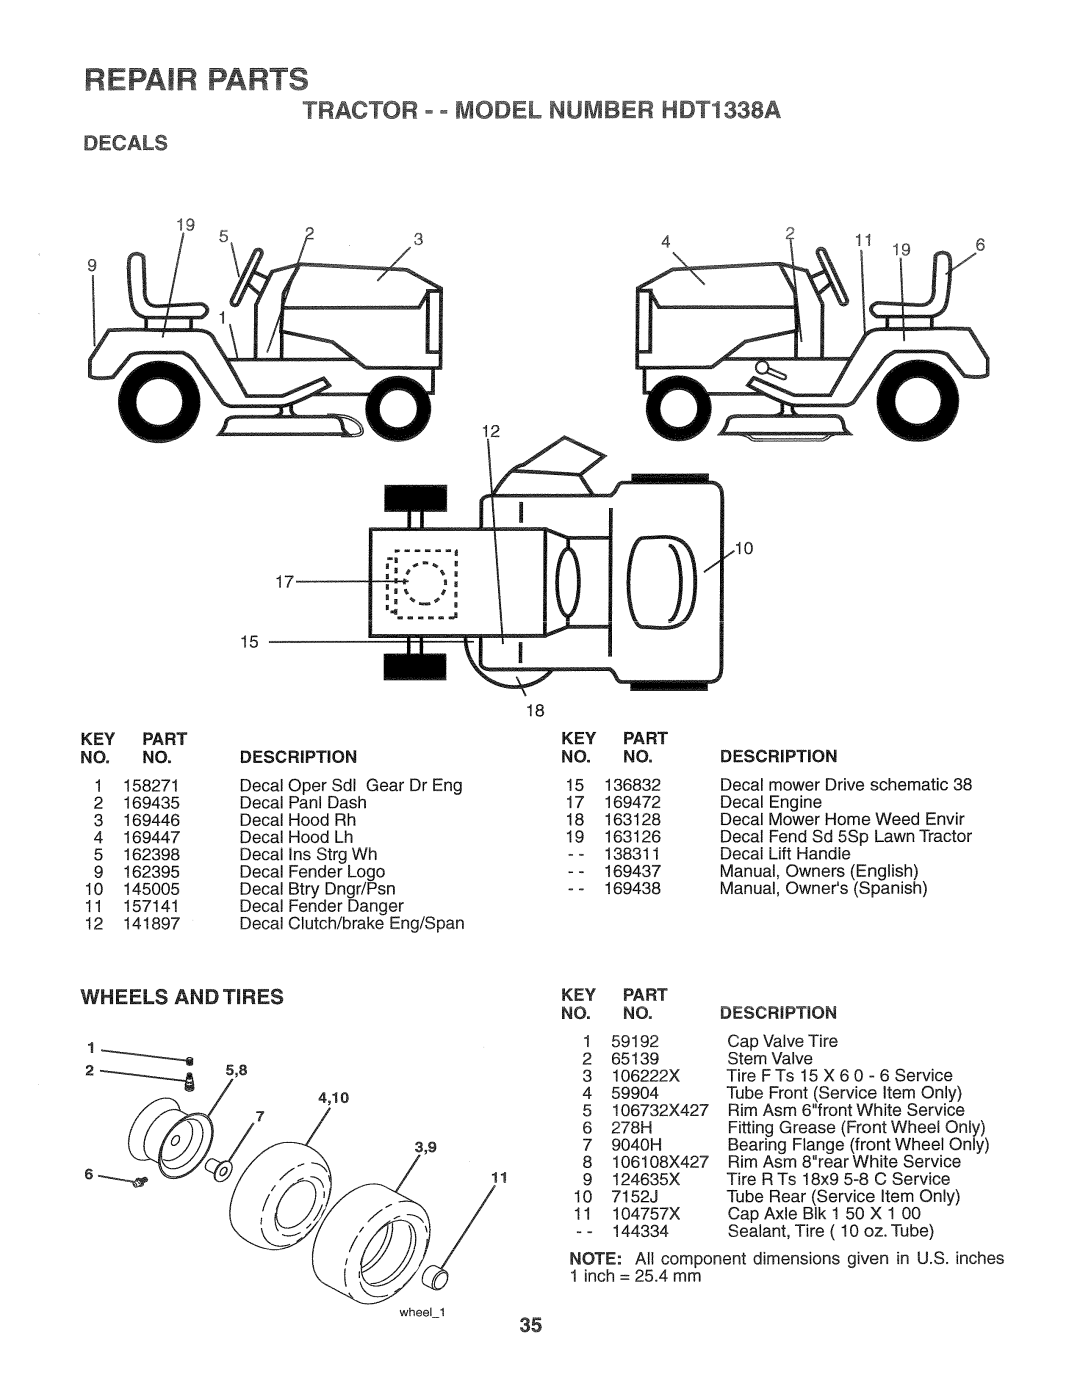 Weed Eater 169437, HDT1338A manual 